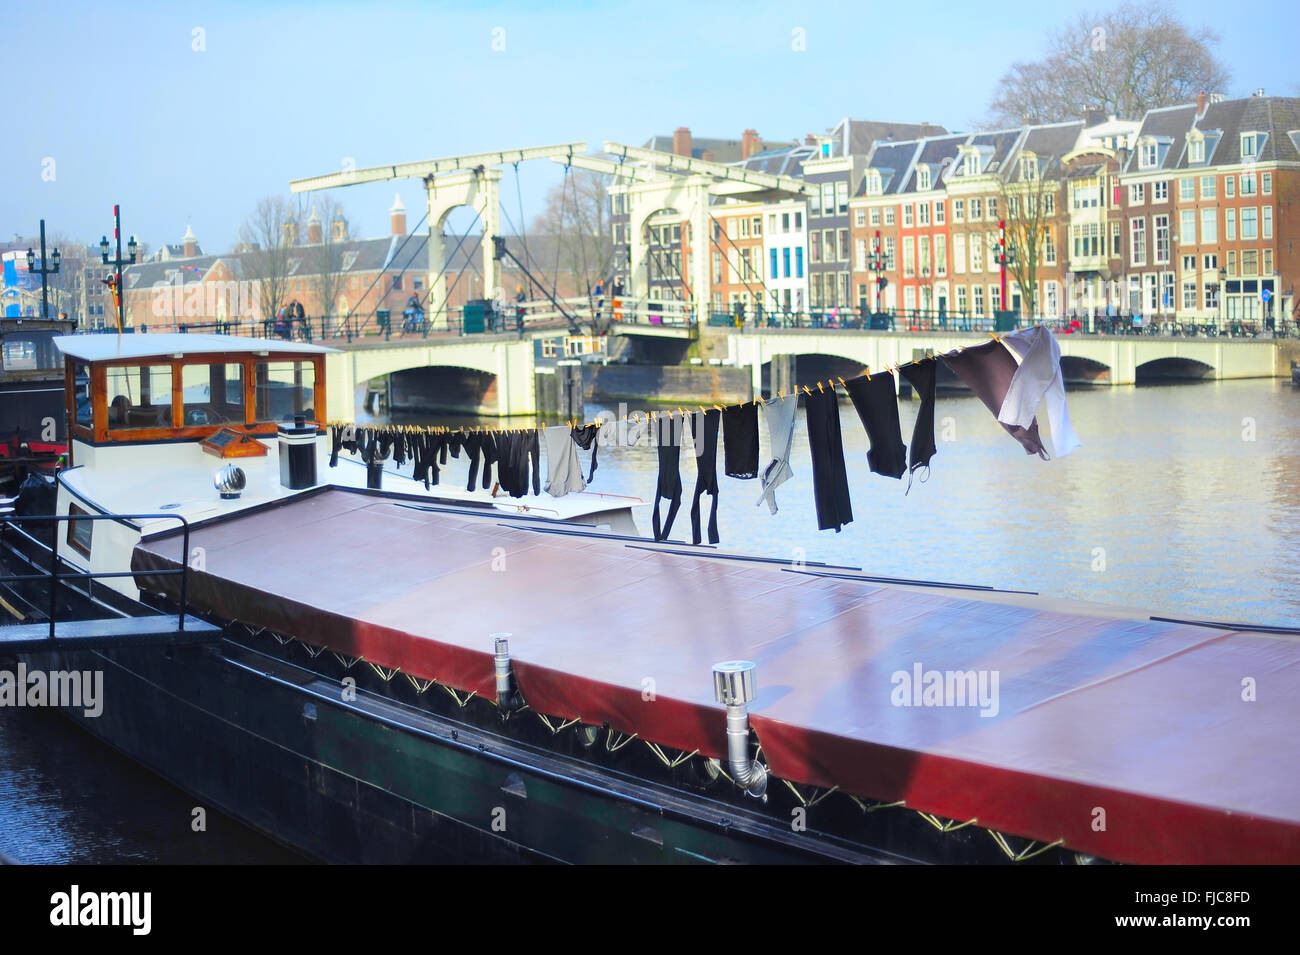 Drying clothes on a barge. Famous Skinny bridge on a background. Amsterdam, Holland Stock Photo